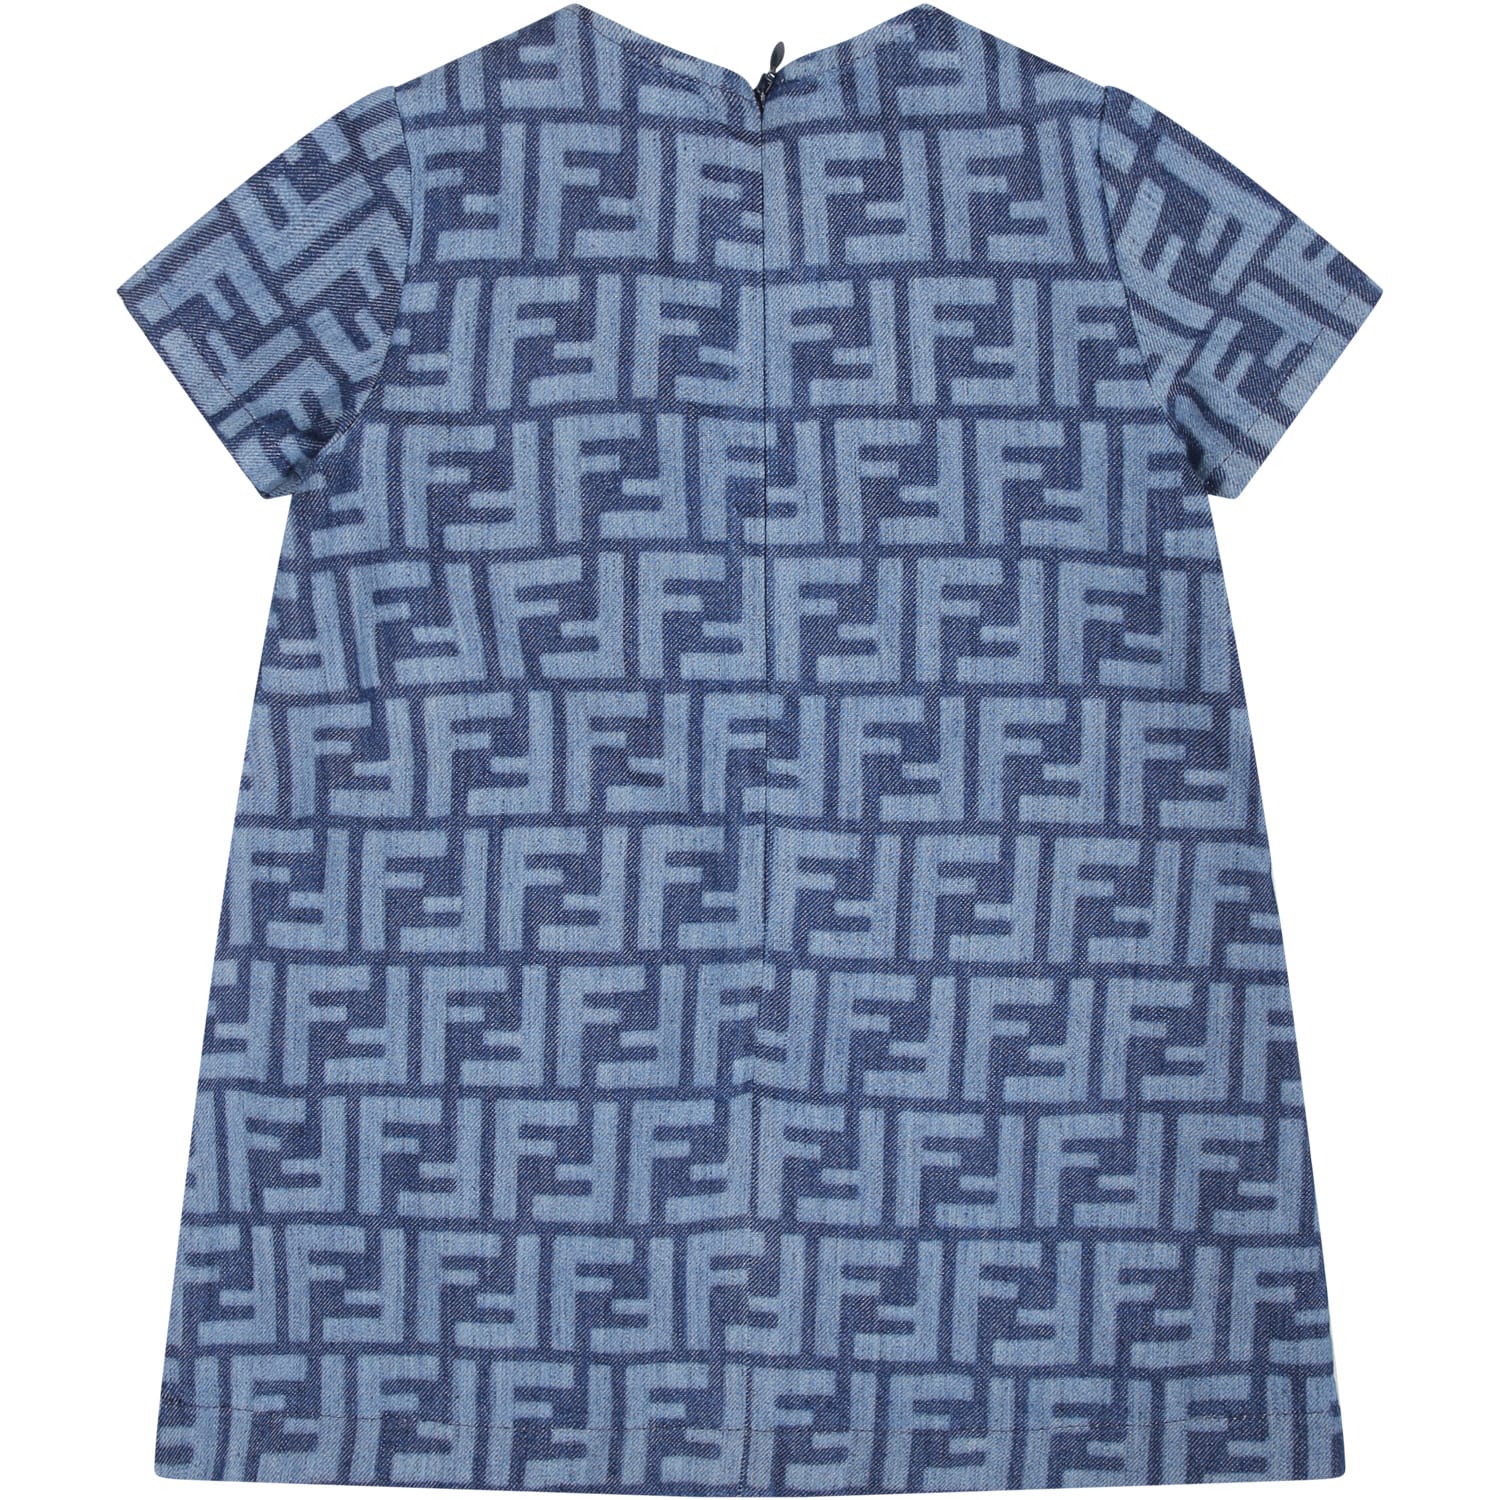 Shop Fendi Denim Dress For Baby Girl With All-over Iconic Ff